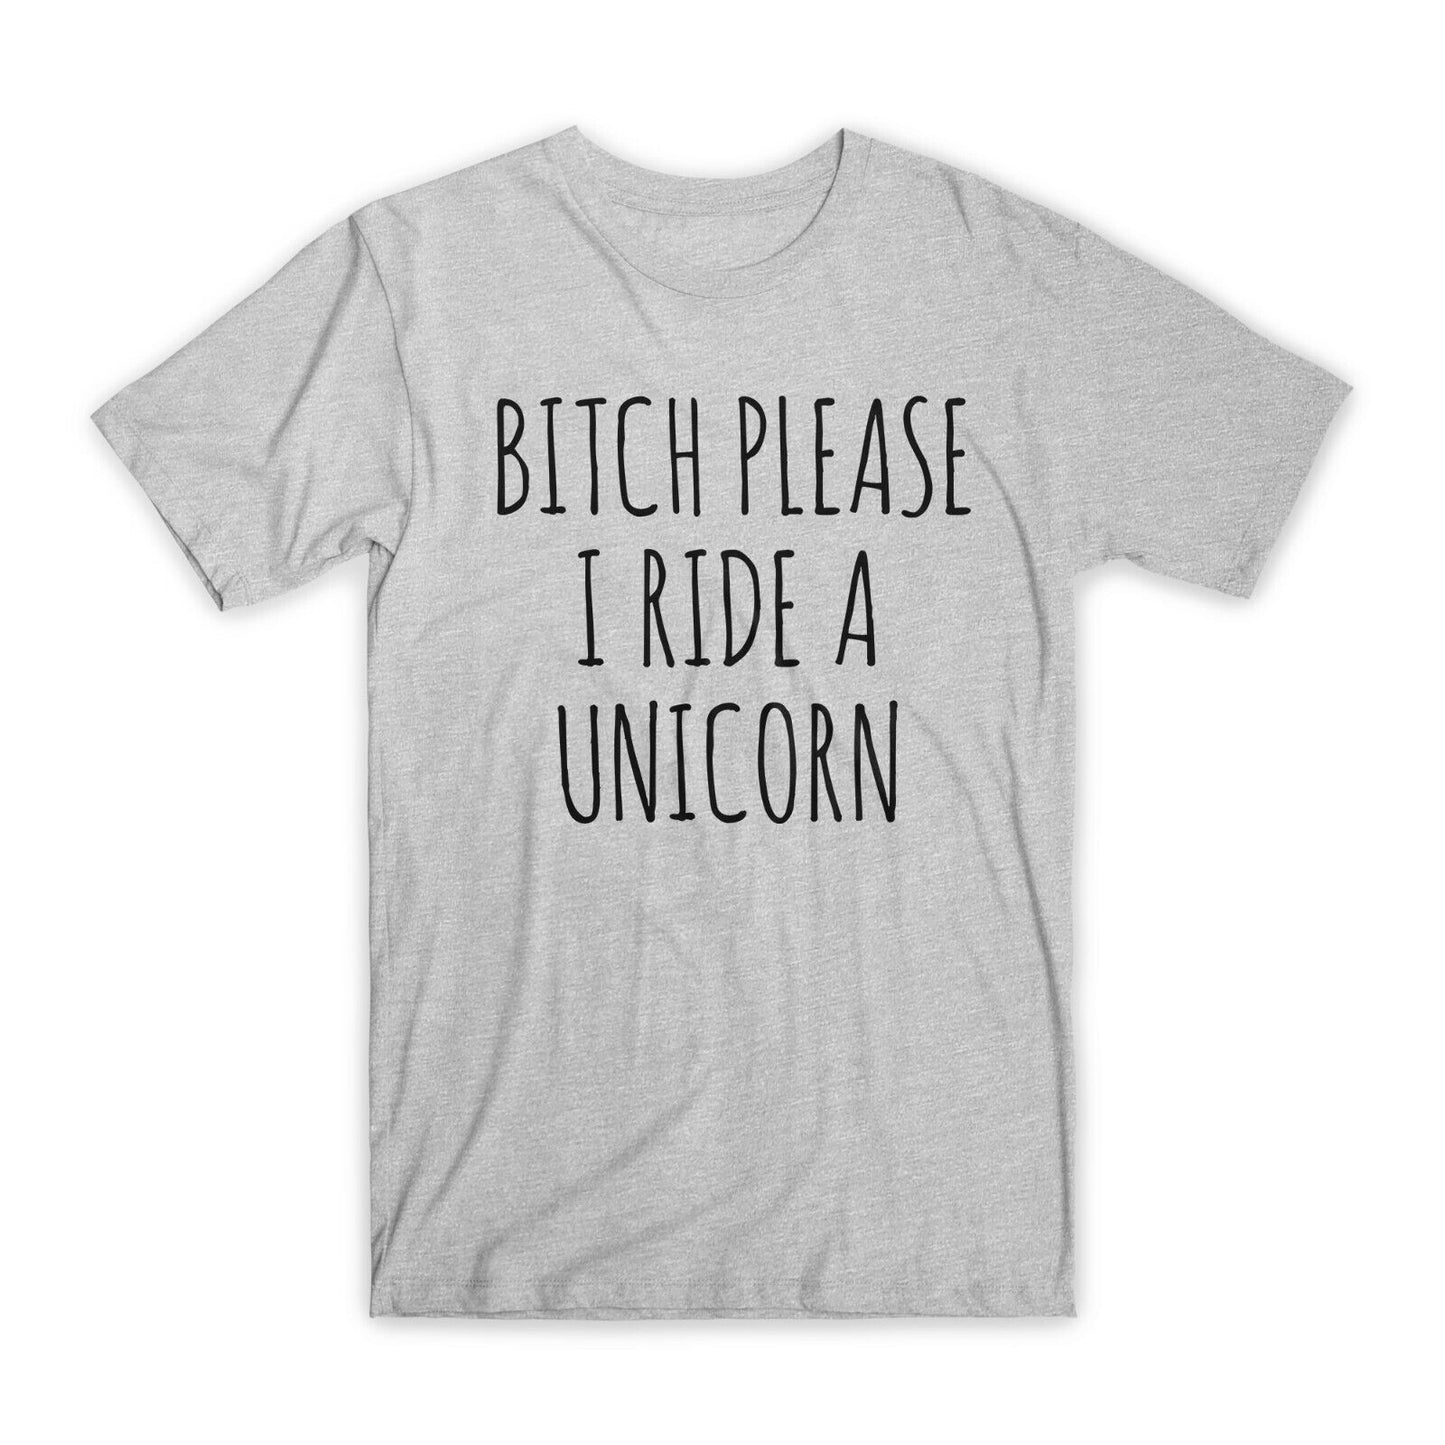 Bitch Please I Ride A Unicorn T-Shirt Premium Soft Cotton Funny Tees Gifts NEW